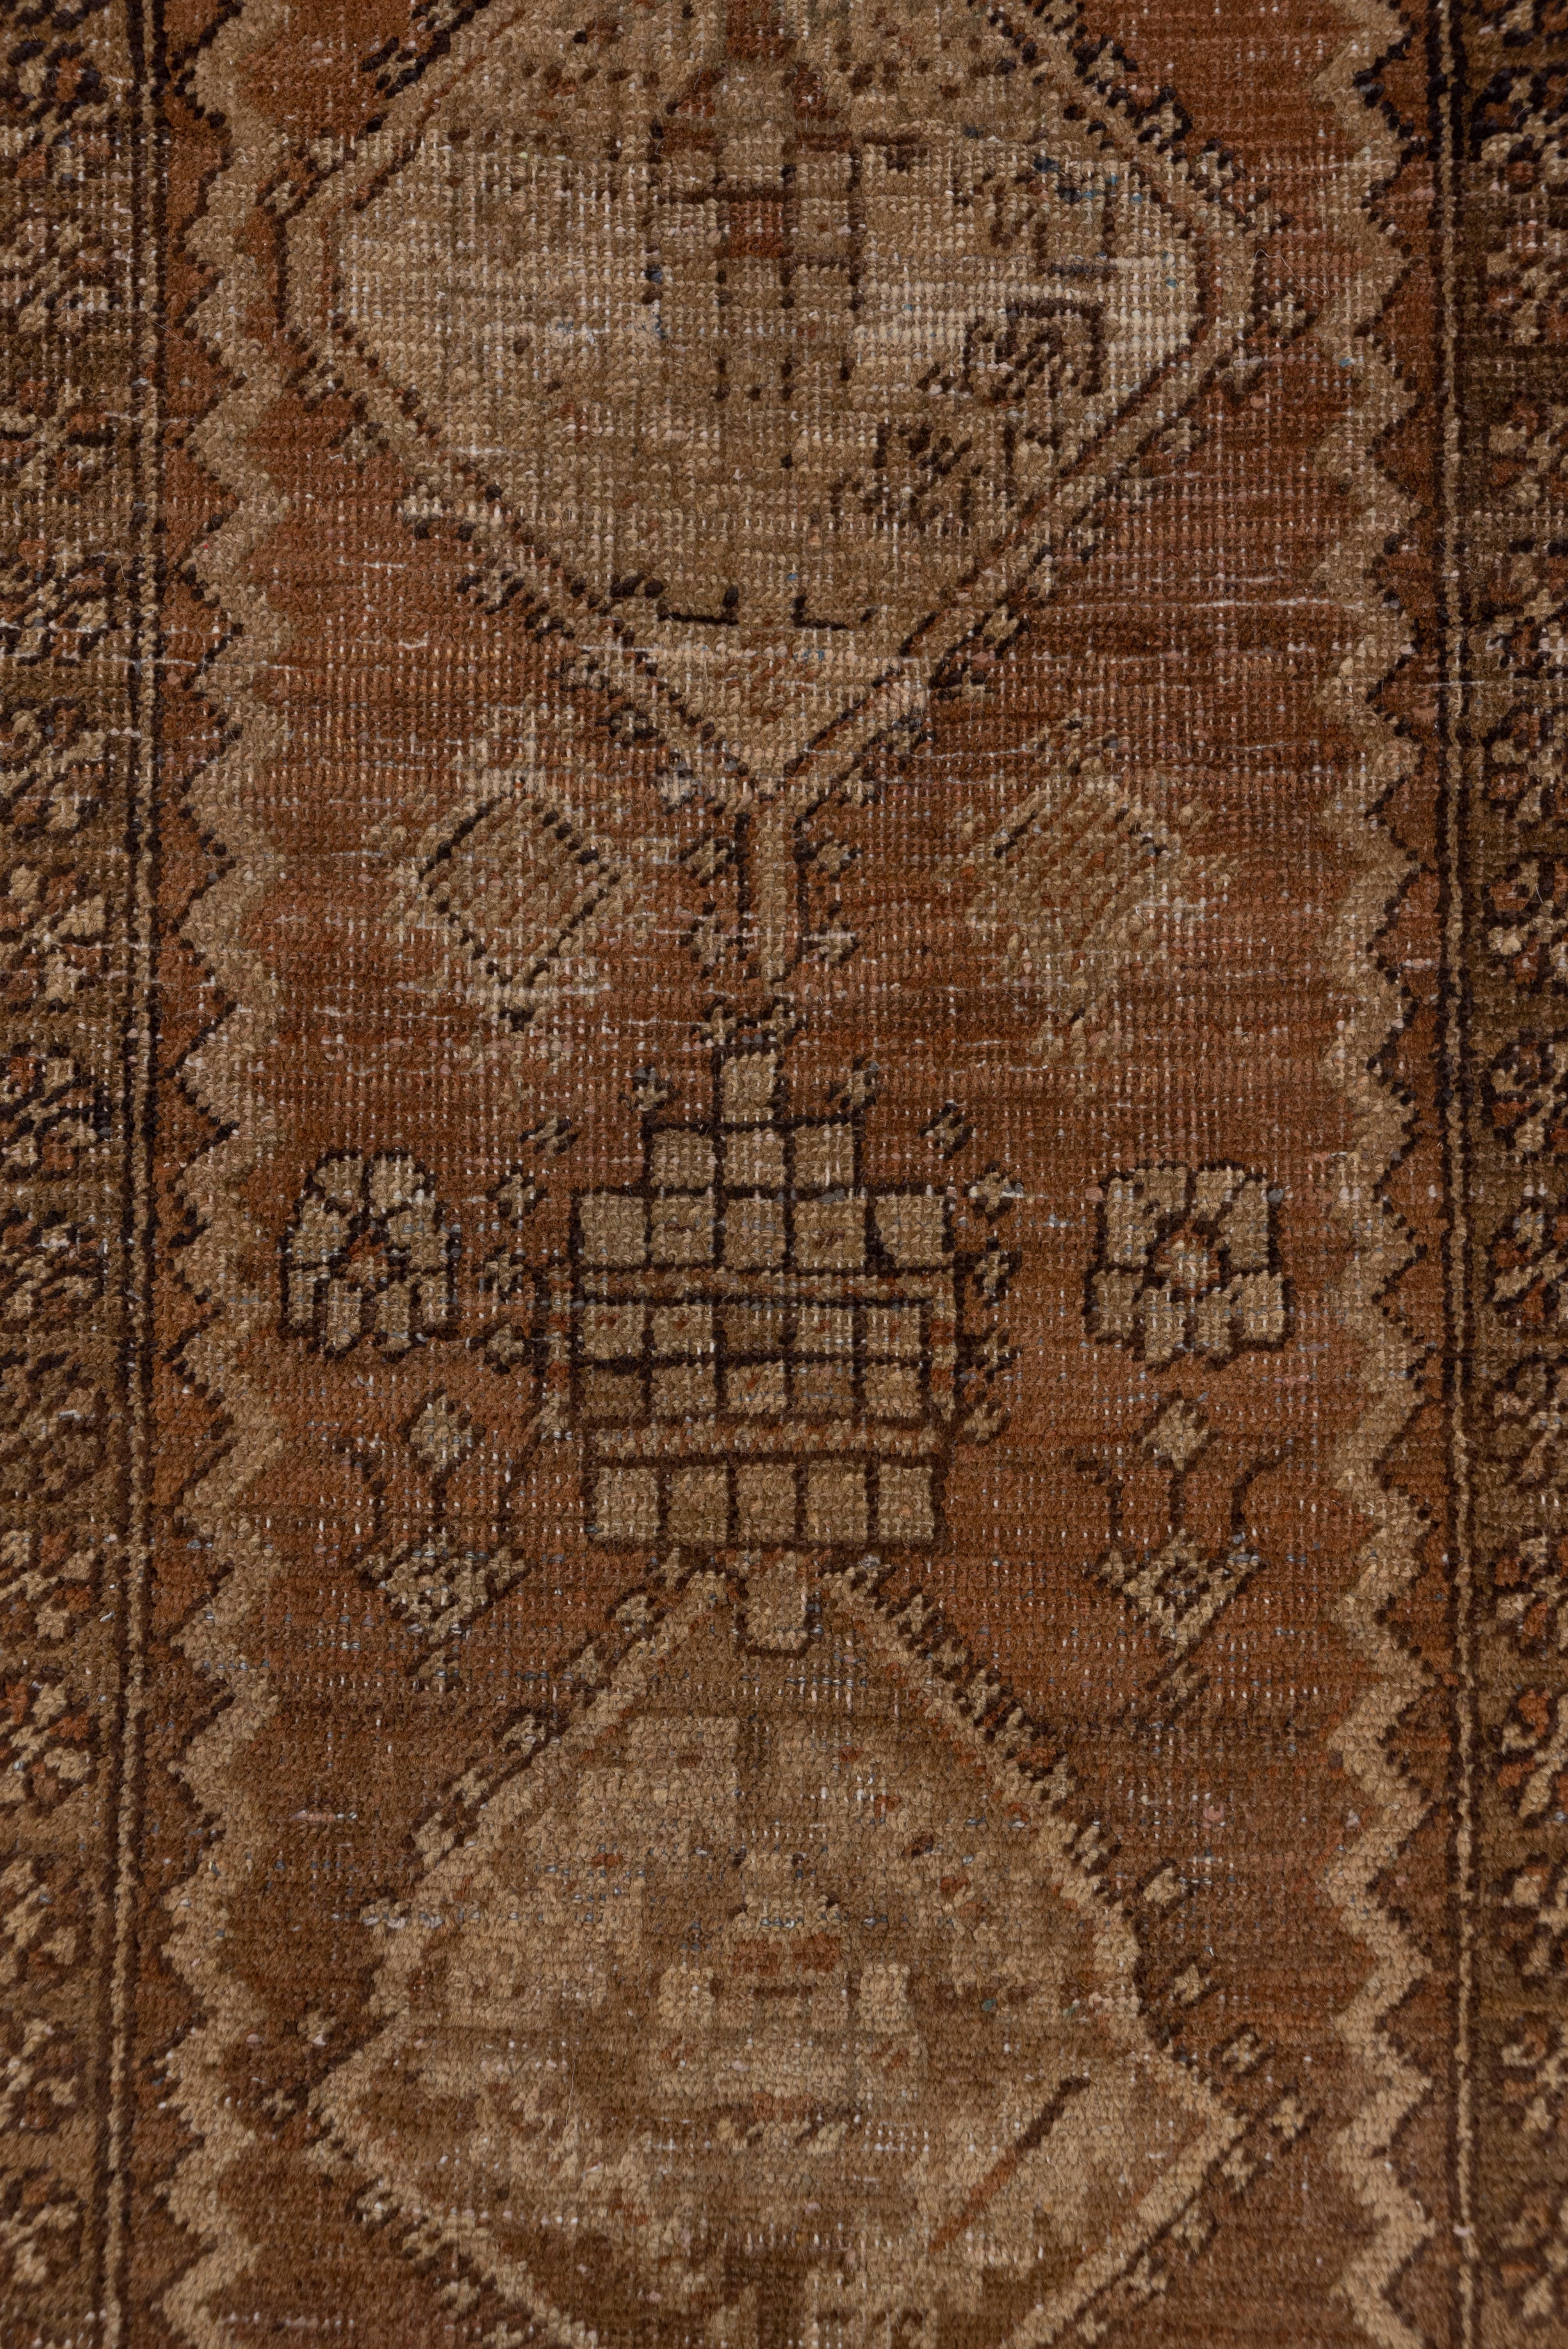 Hand-Knotted Antique Persian Heriz Runner, Brown Tone on Tone Field, circa 1930s For Sale